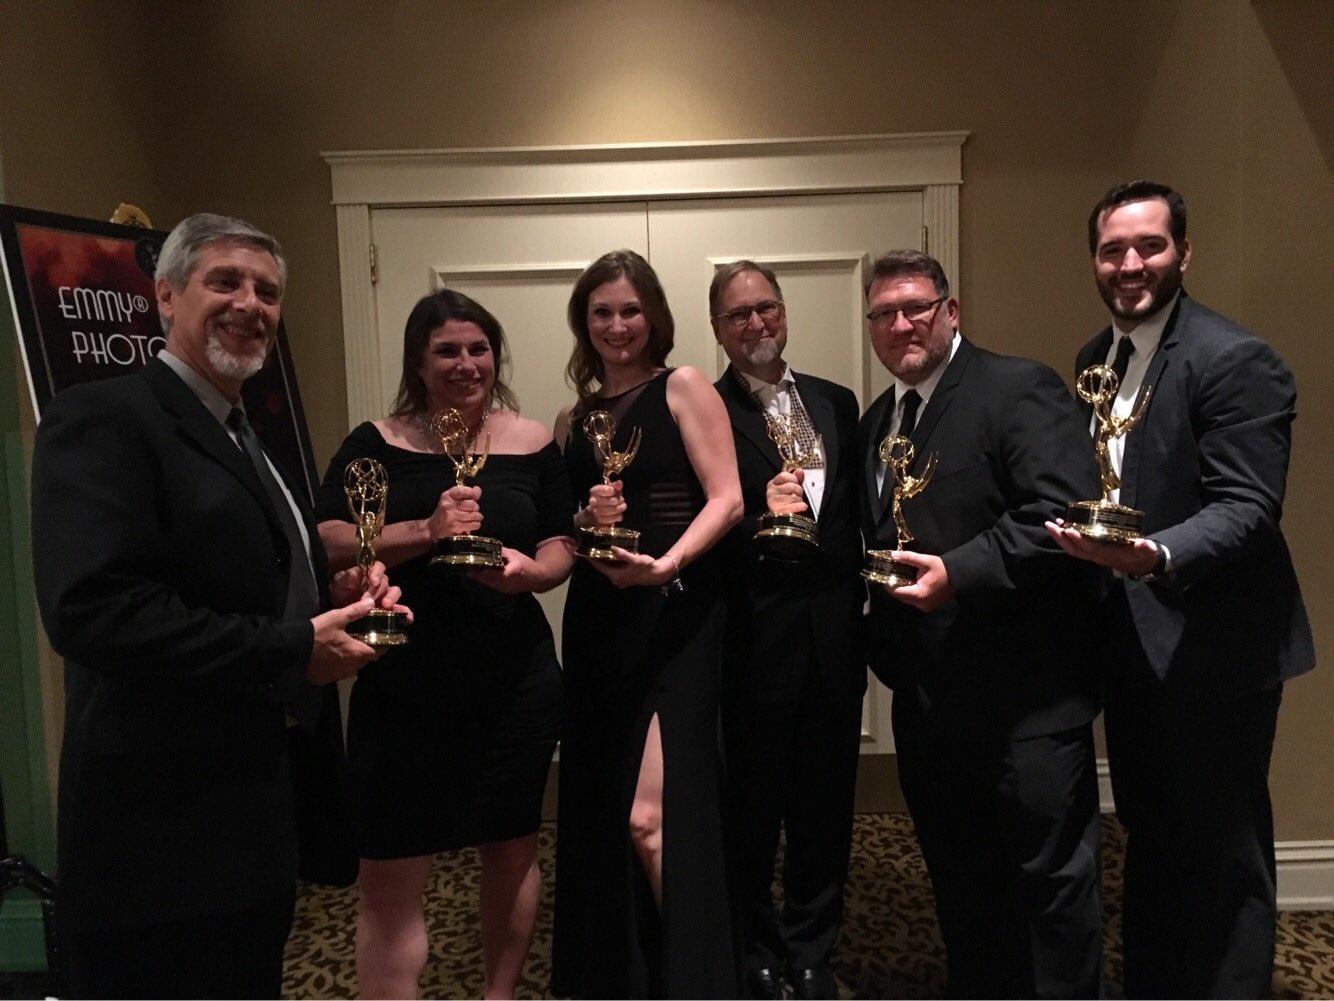 Part of the KCPT gang with their golden statuettes. We're proud of the work we're doing in and for the community.